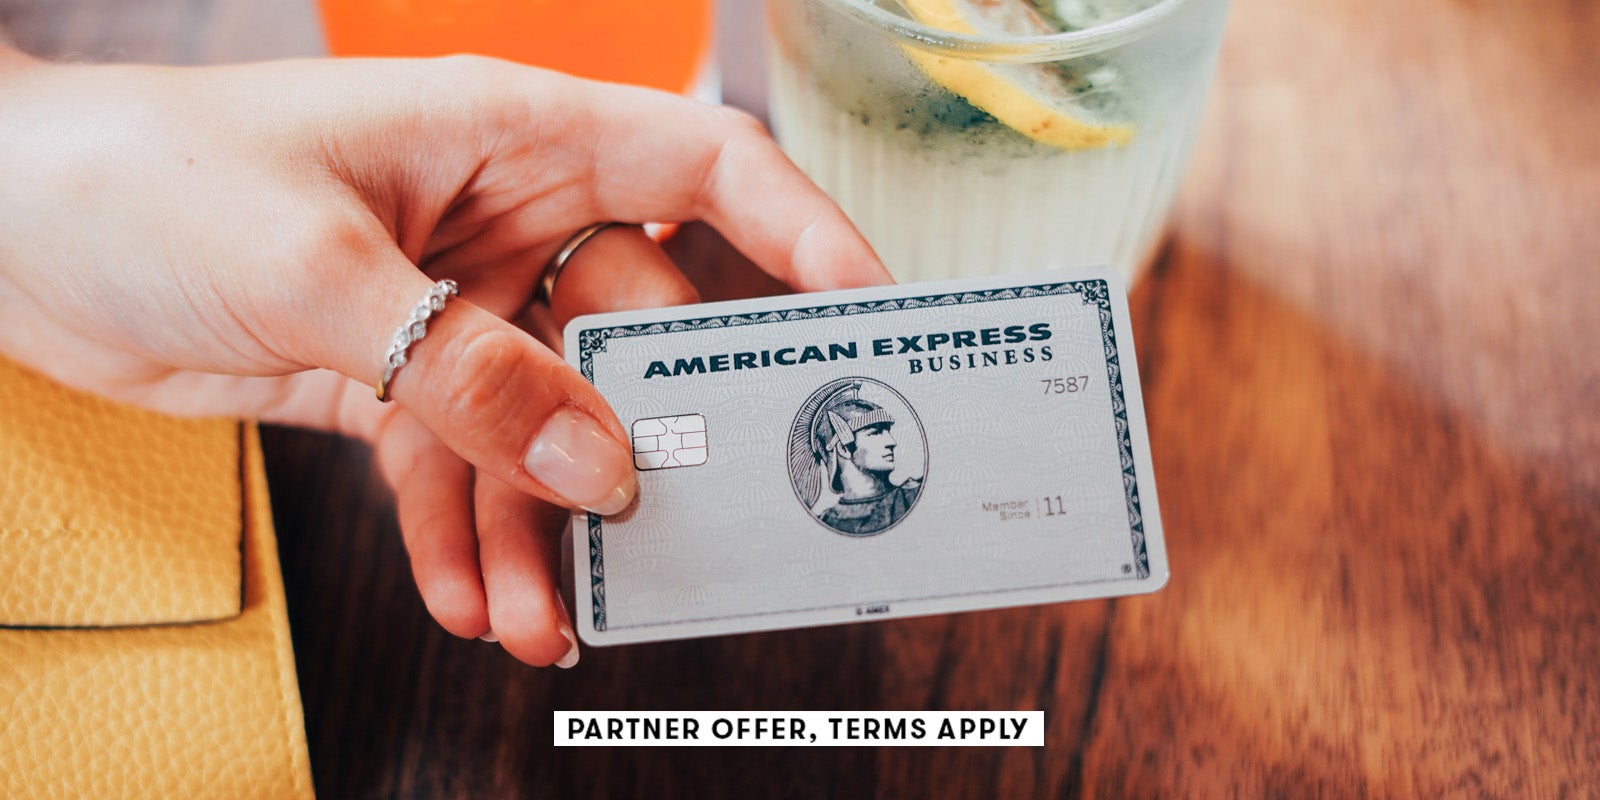 How to apply for an Amex business card